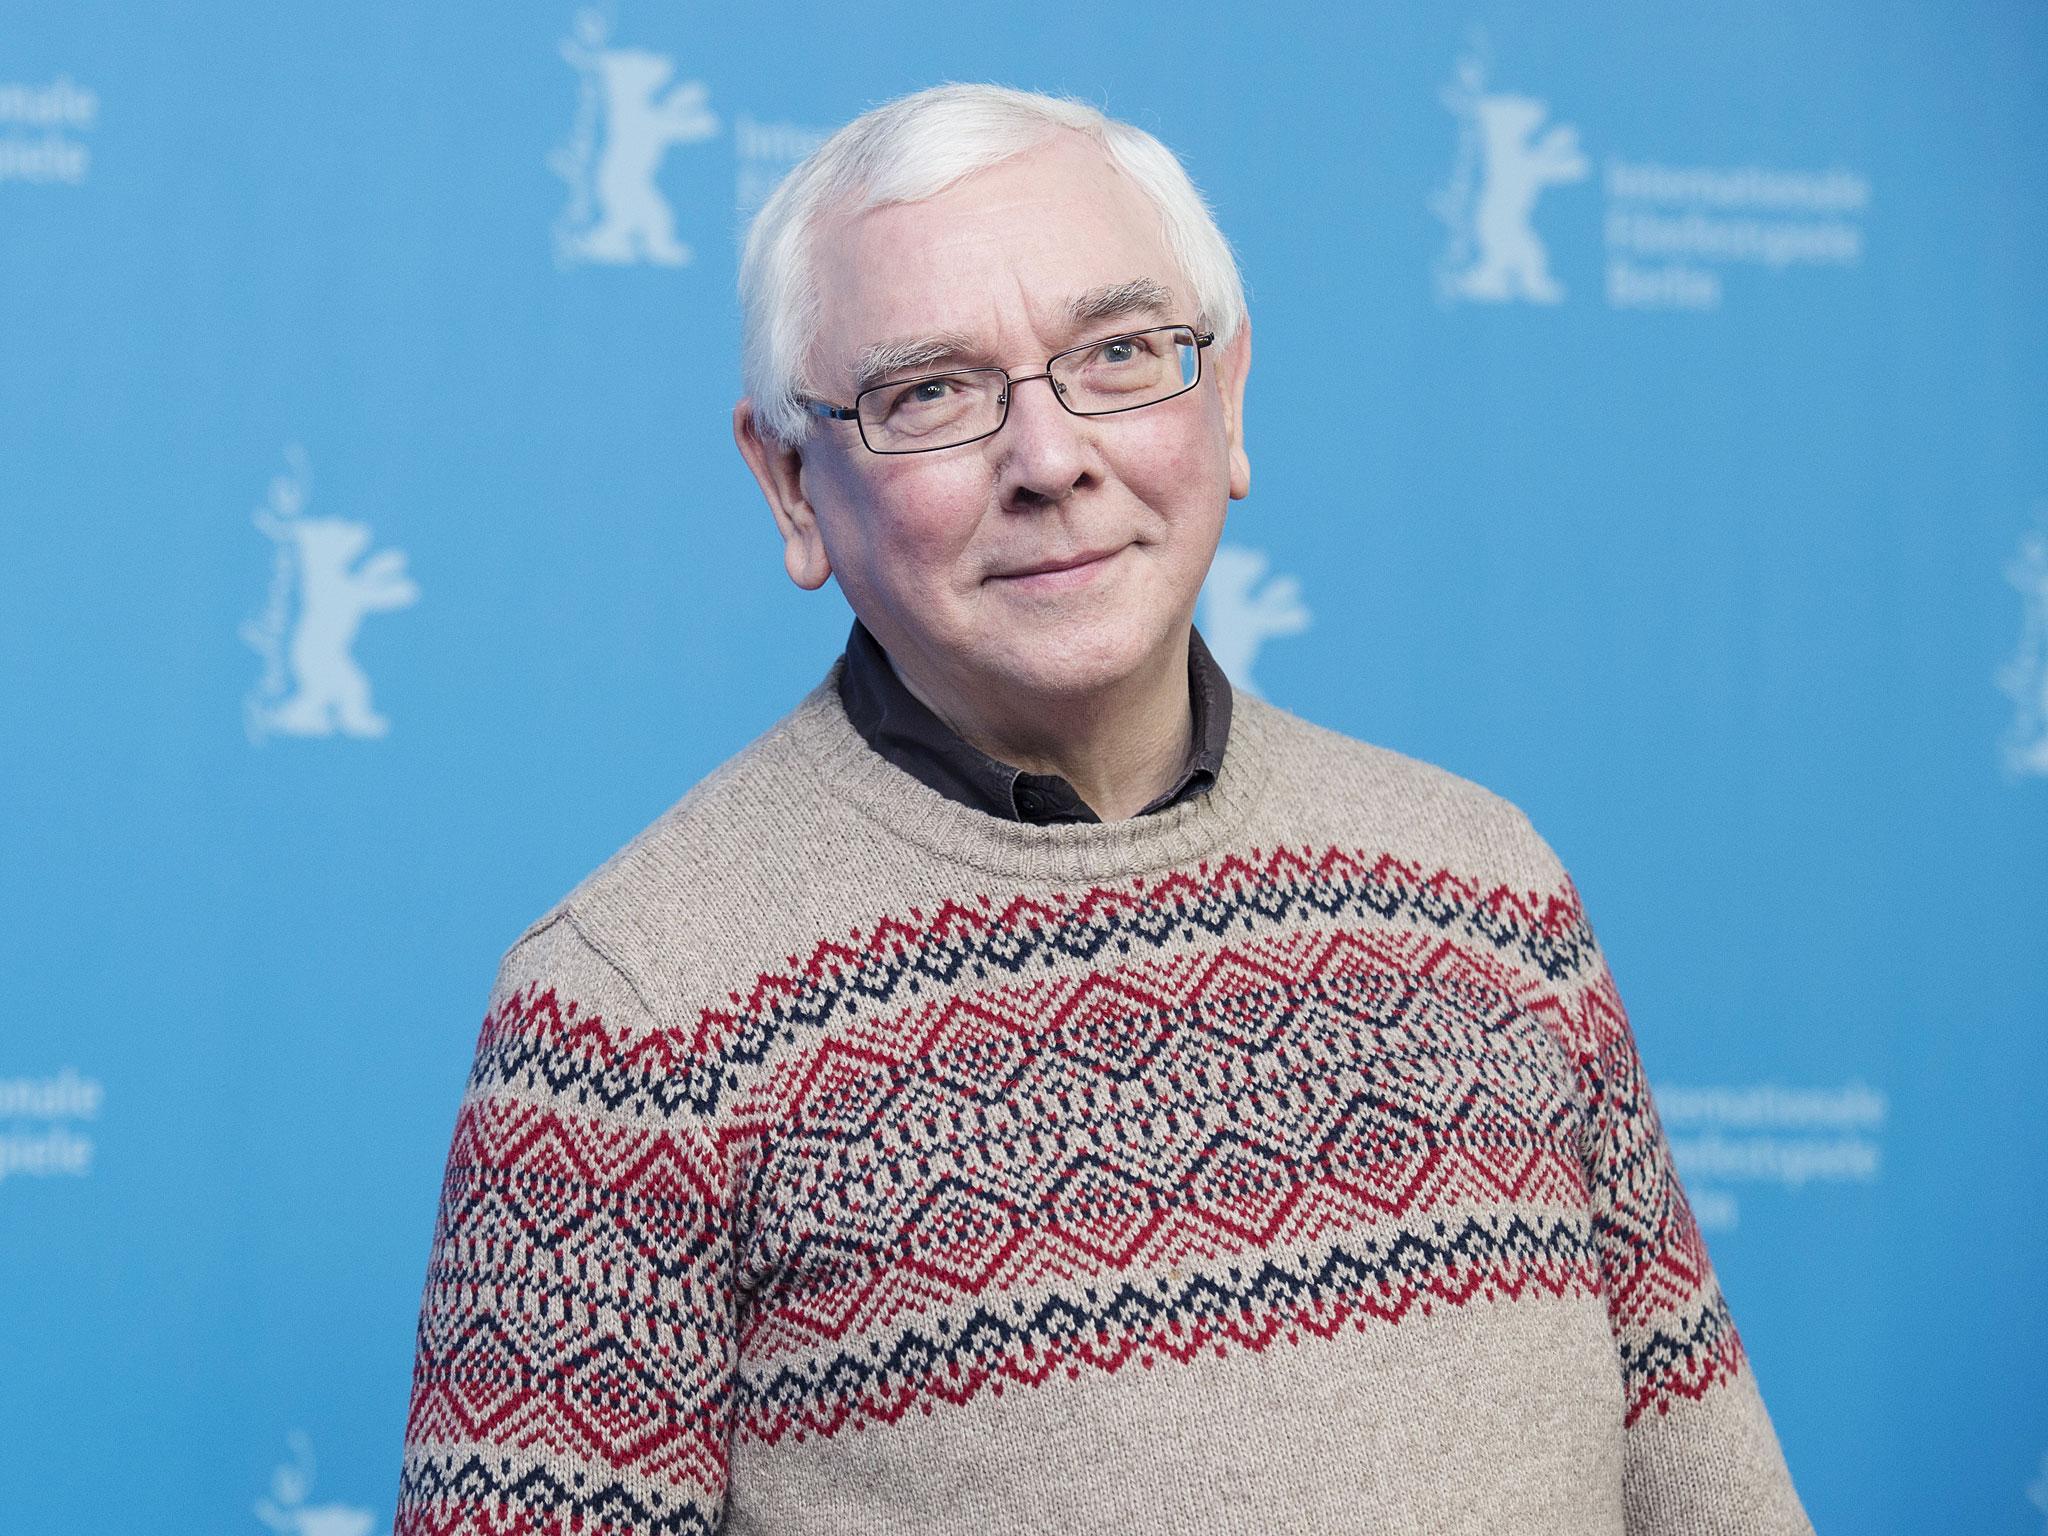 &#13;
Terence Davies promotes 'A Quiet Passion' at the Berlin Film Festival &#13;